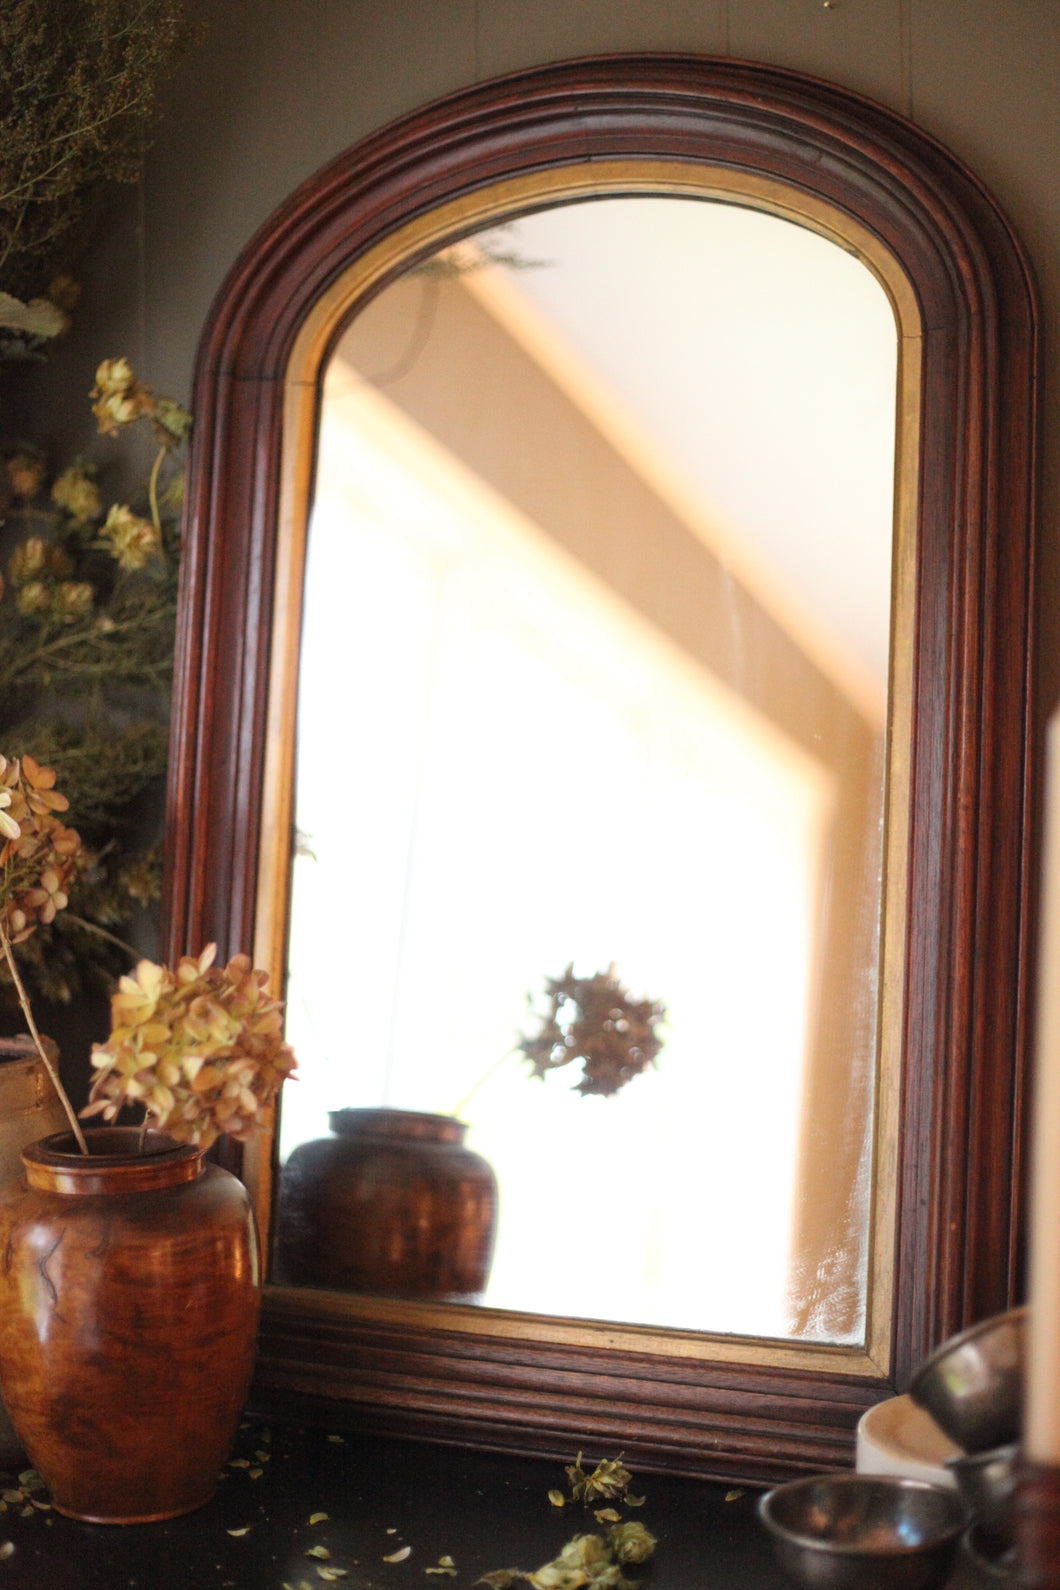 Early Century Mahogany Arched Mirror with Gold Gilt Trim